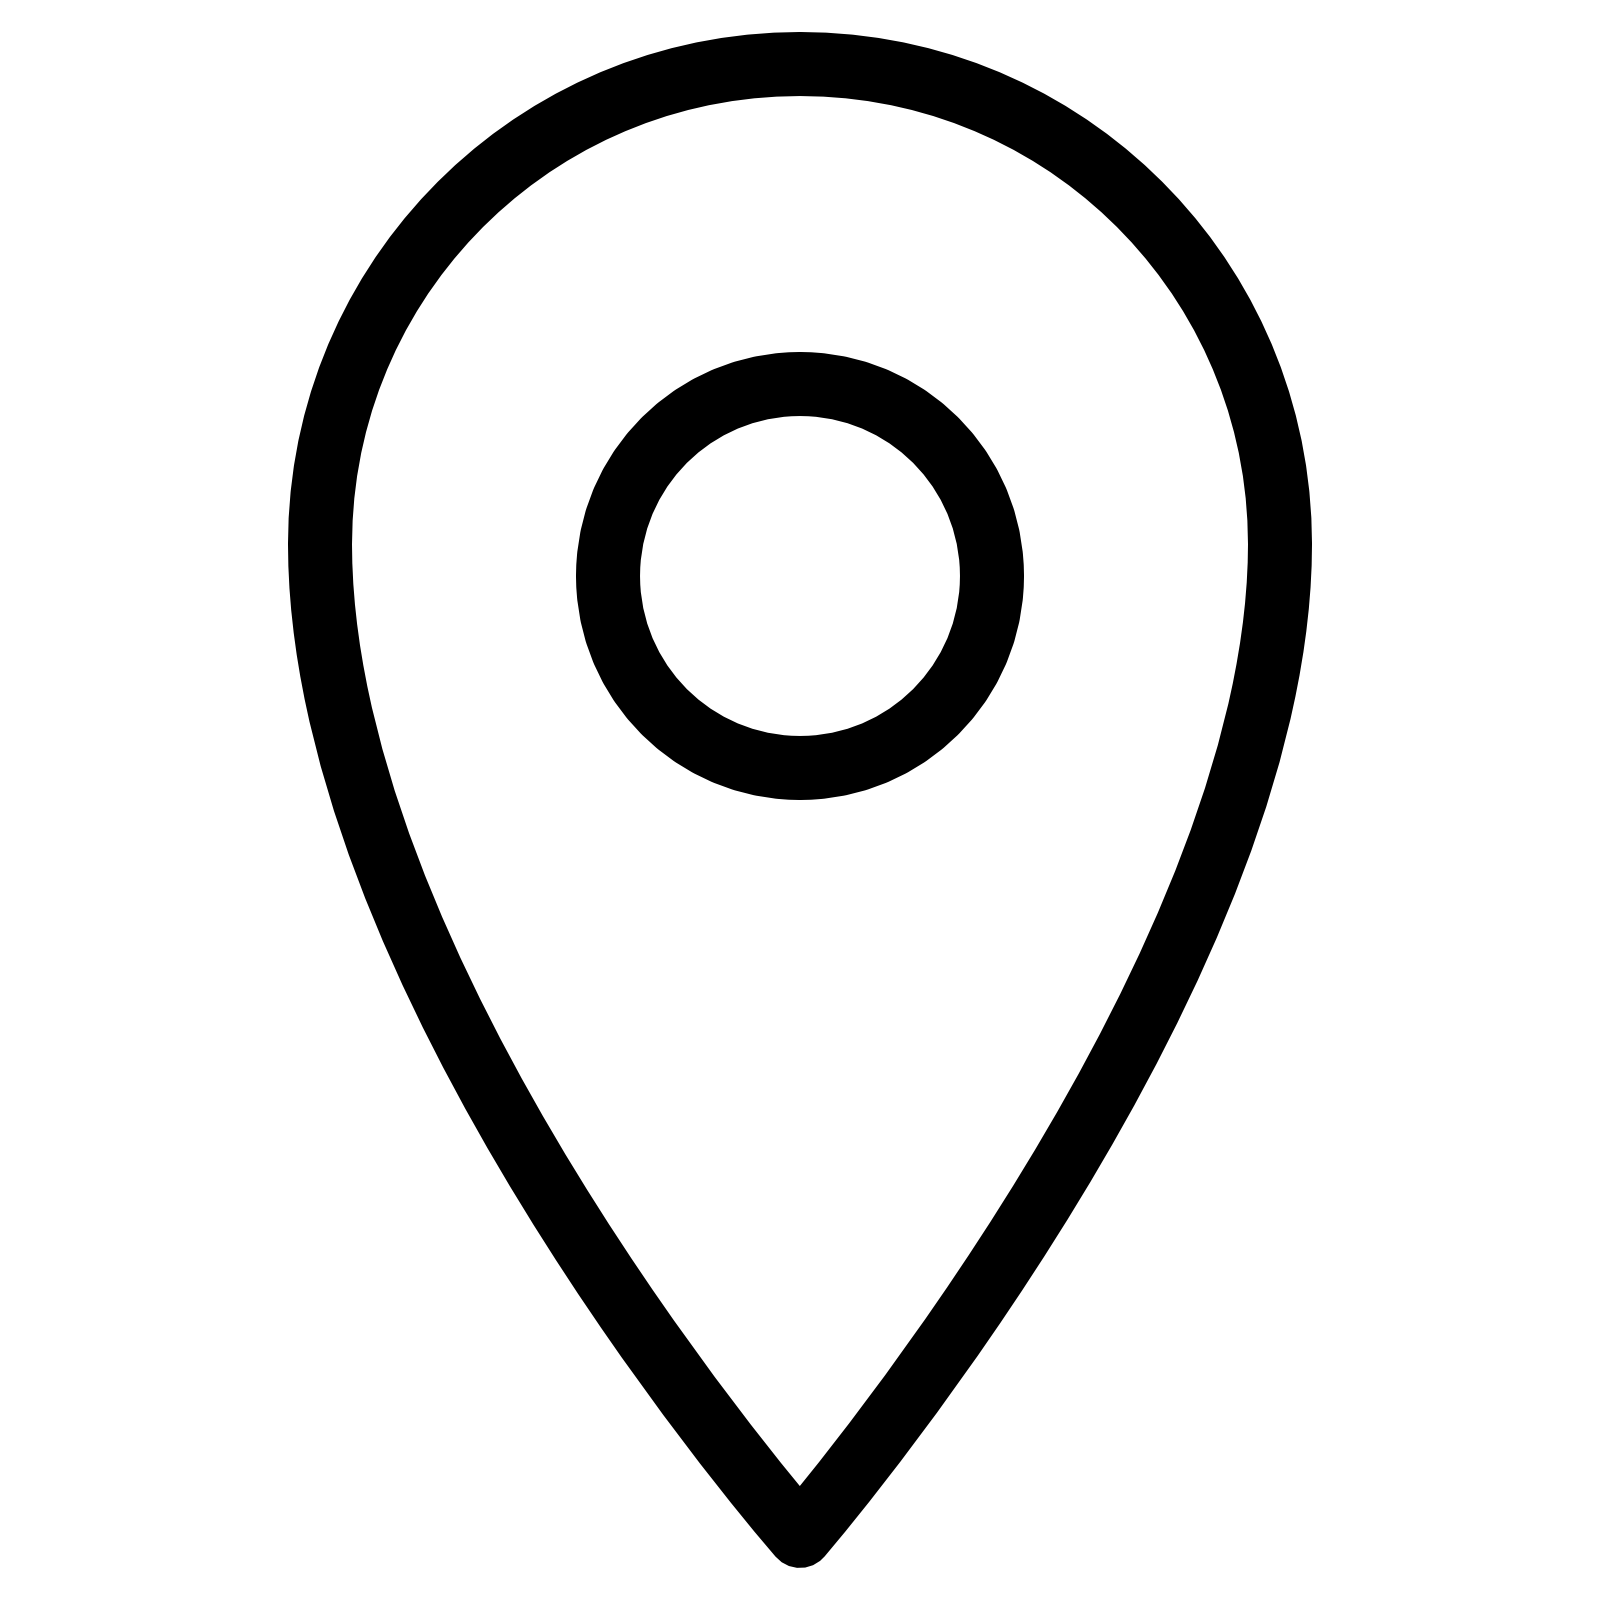 red-location-icon-map-png-4